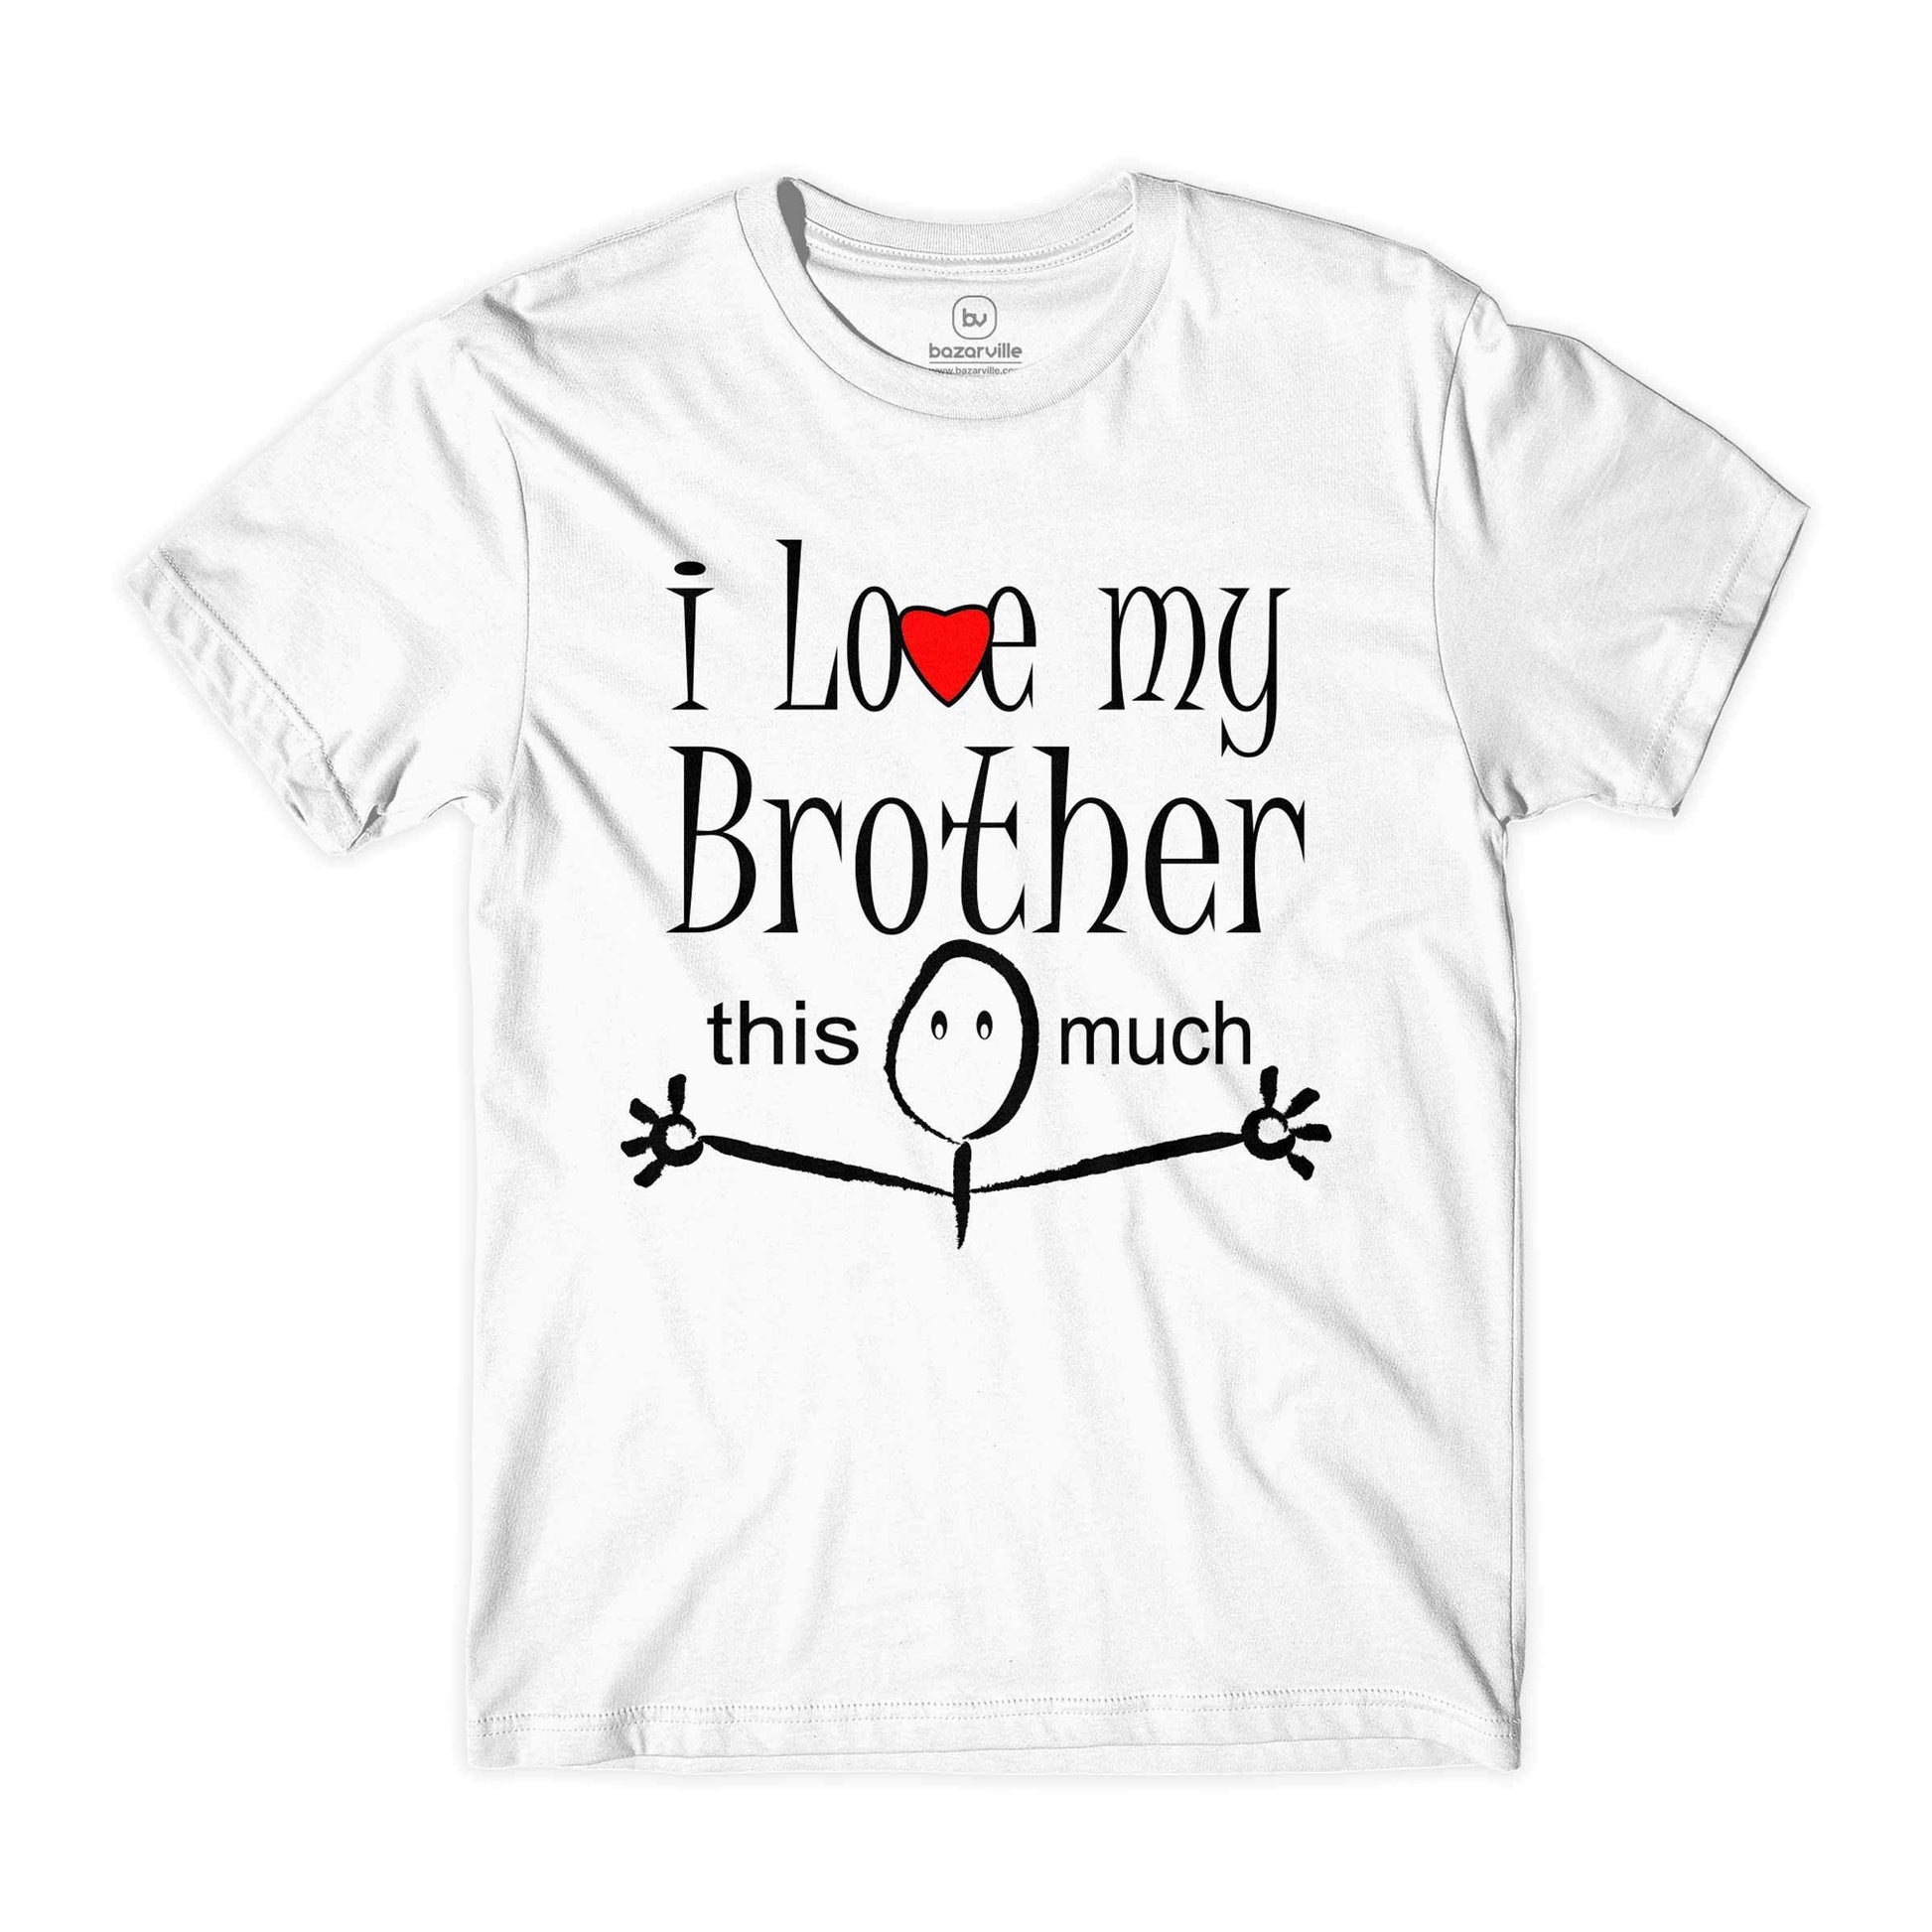 Bazarville Couple Design Love my brother sister